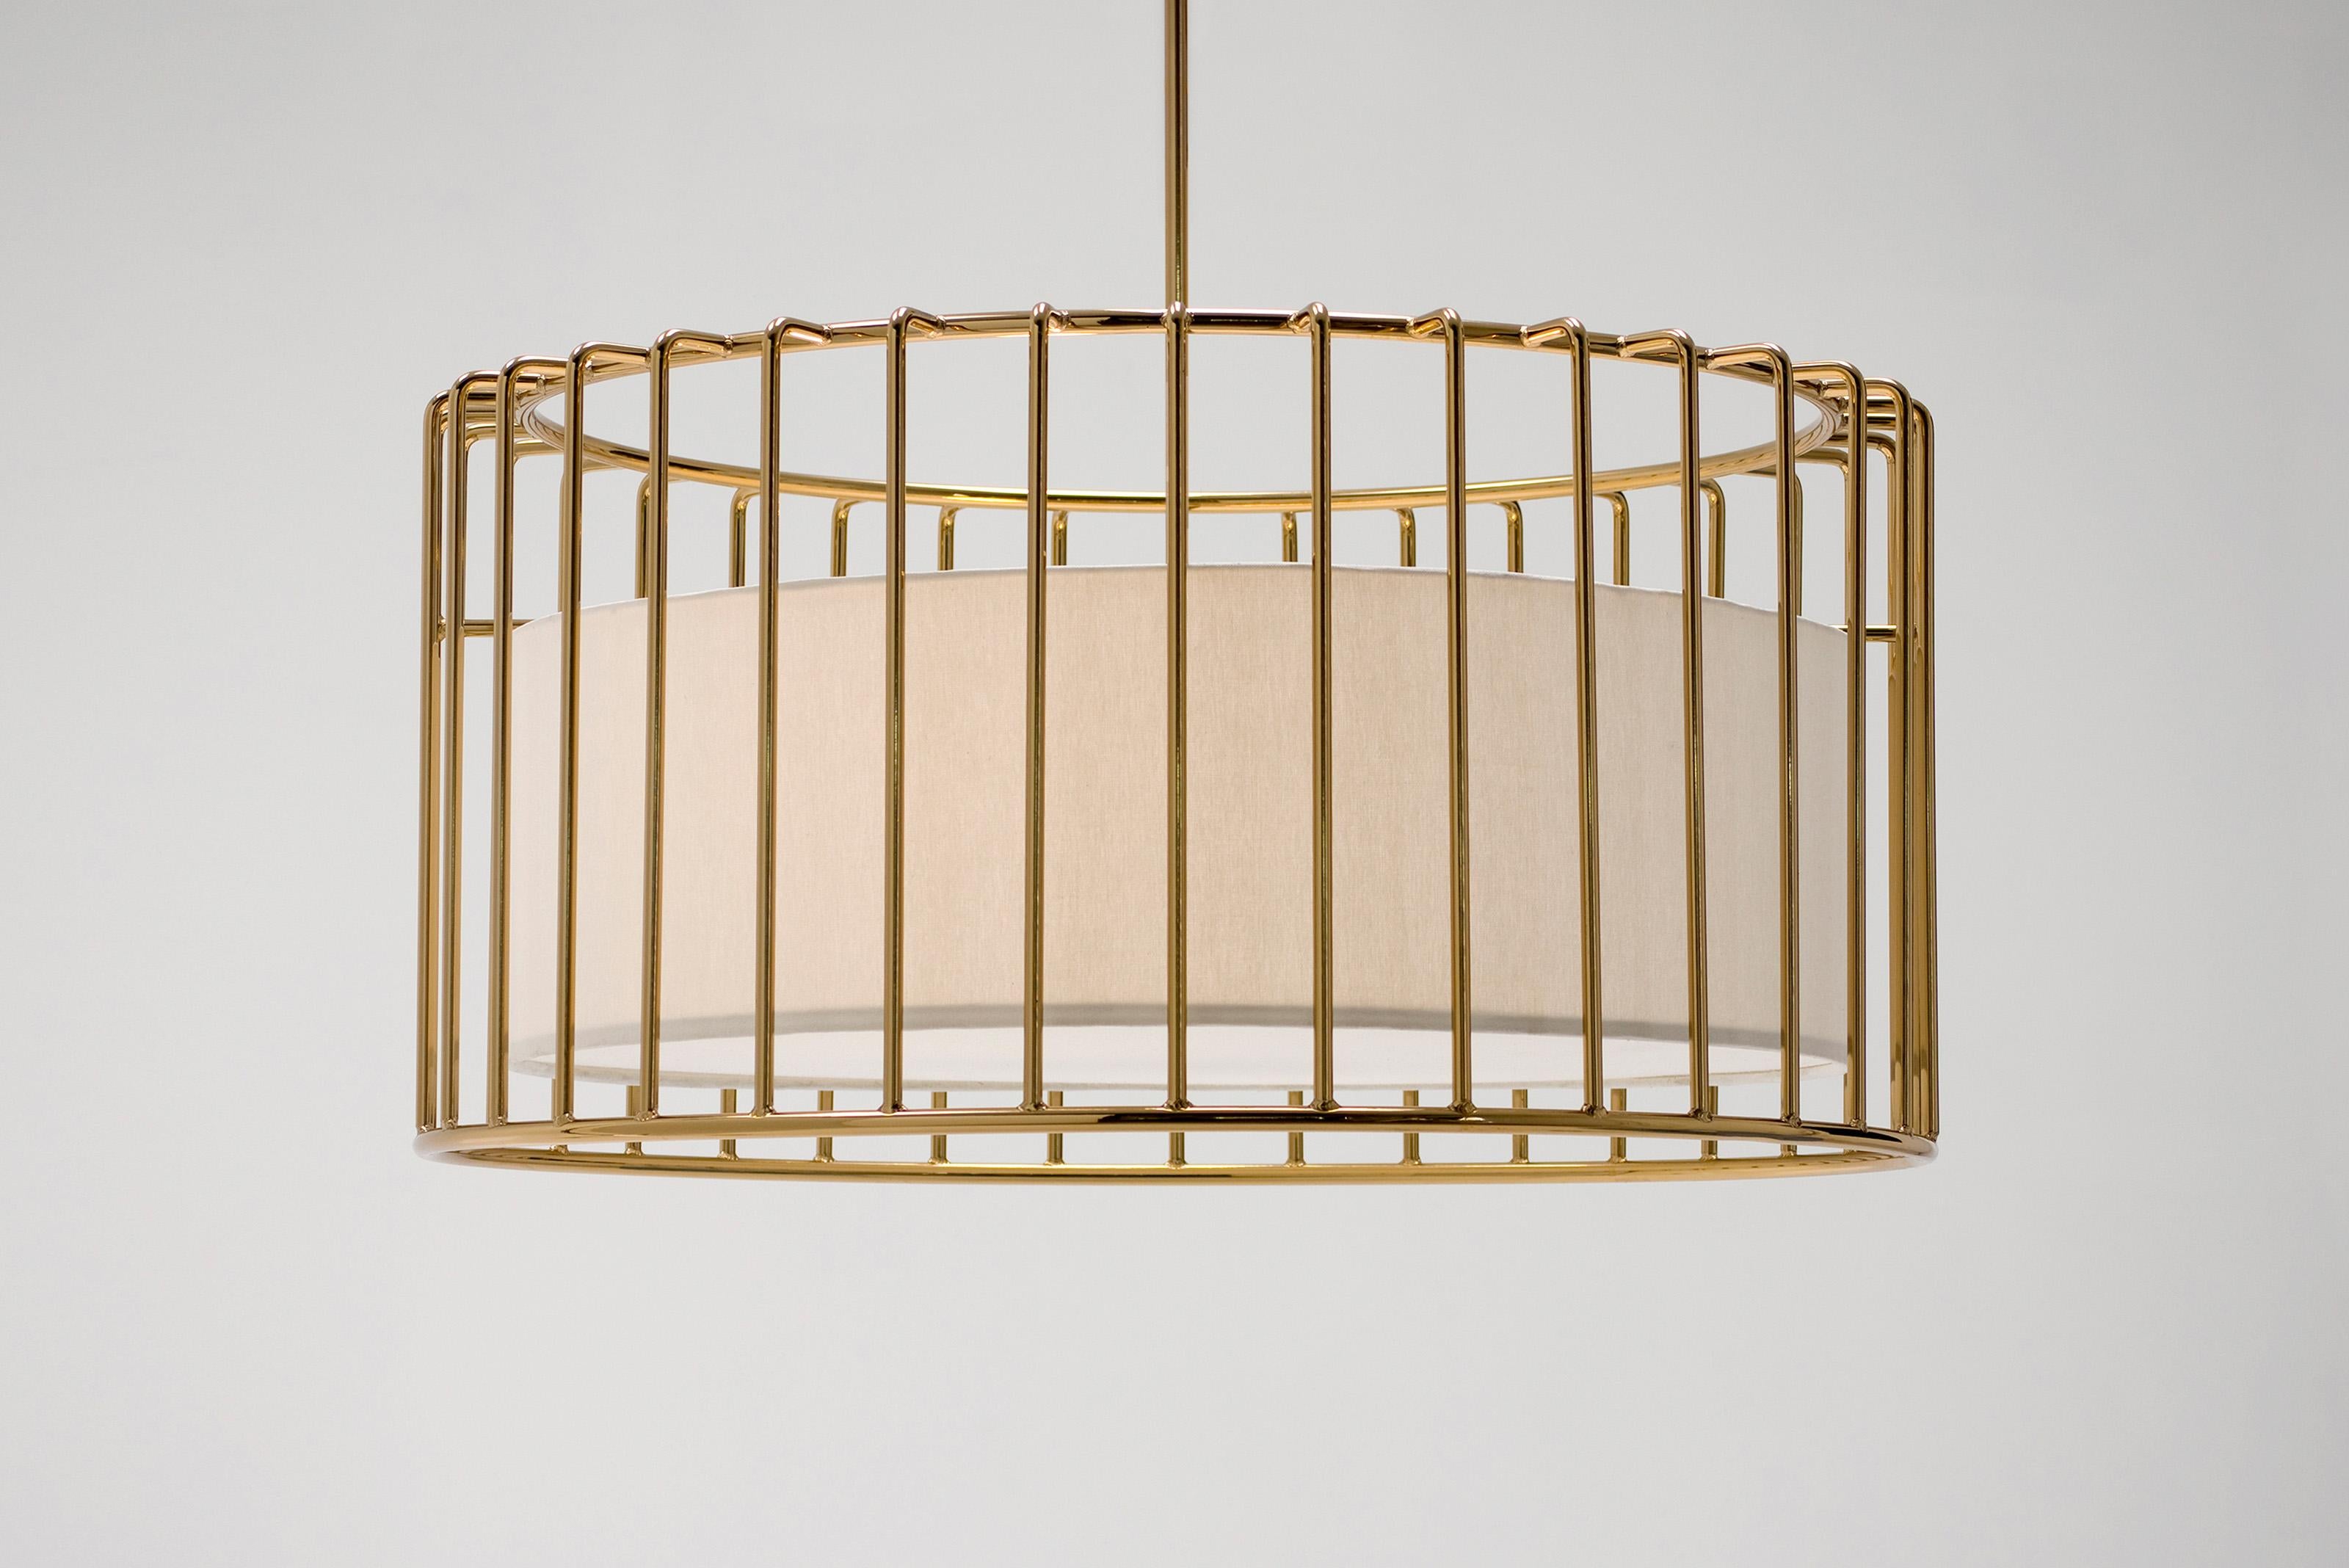 Inner Beauty Chandelier by Phase Design
Dimensions: Ø 81.3 x H 40.6 cm. 
Materials: Linen and smoked brass.

Solid steel bar available in a smoked brass, polished chrome, burnt copper, gloss or flat black and white powder coat. Powder coat finishes